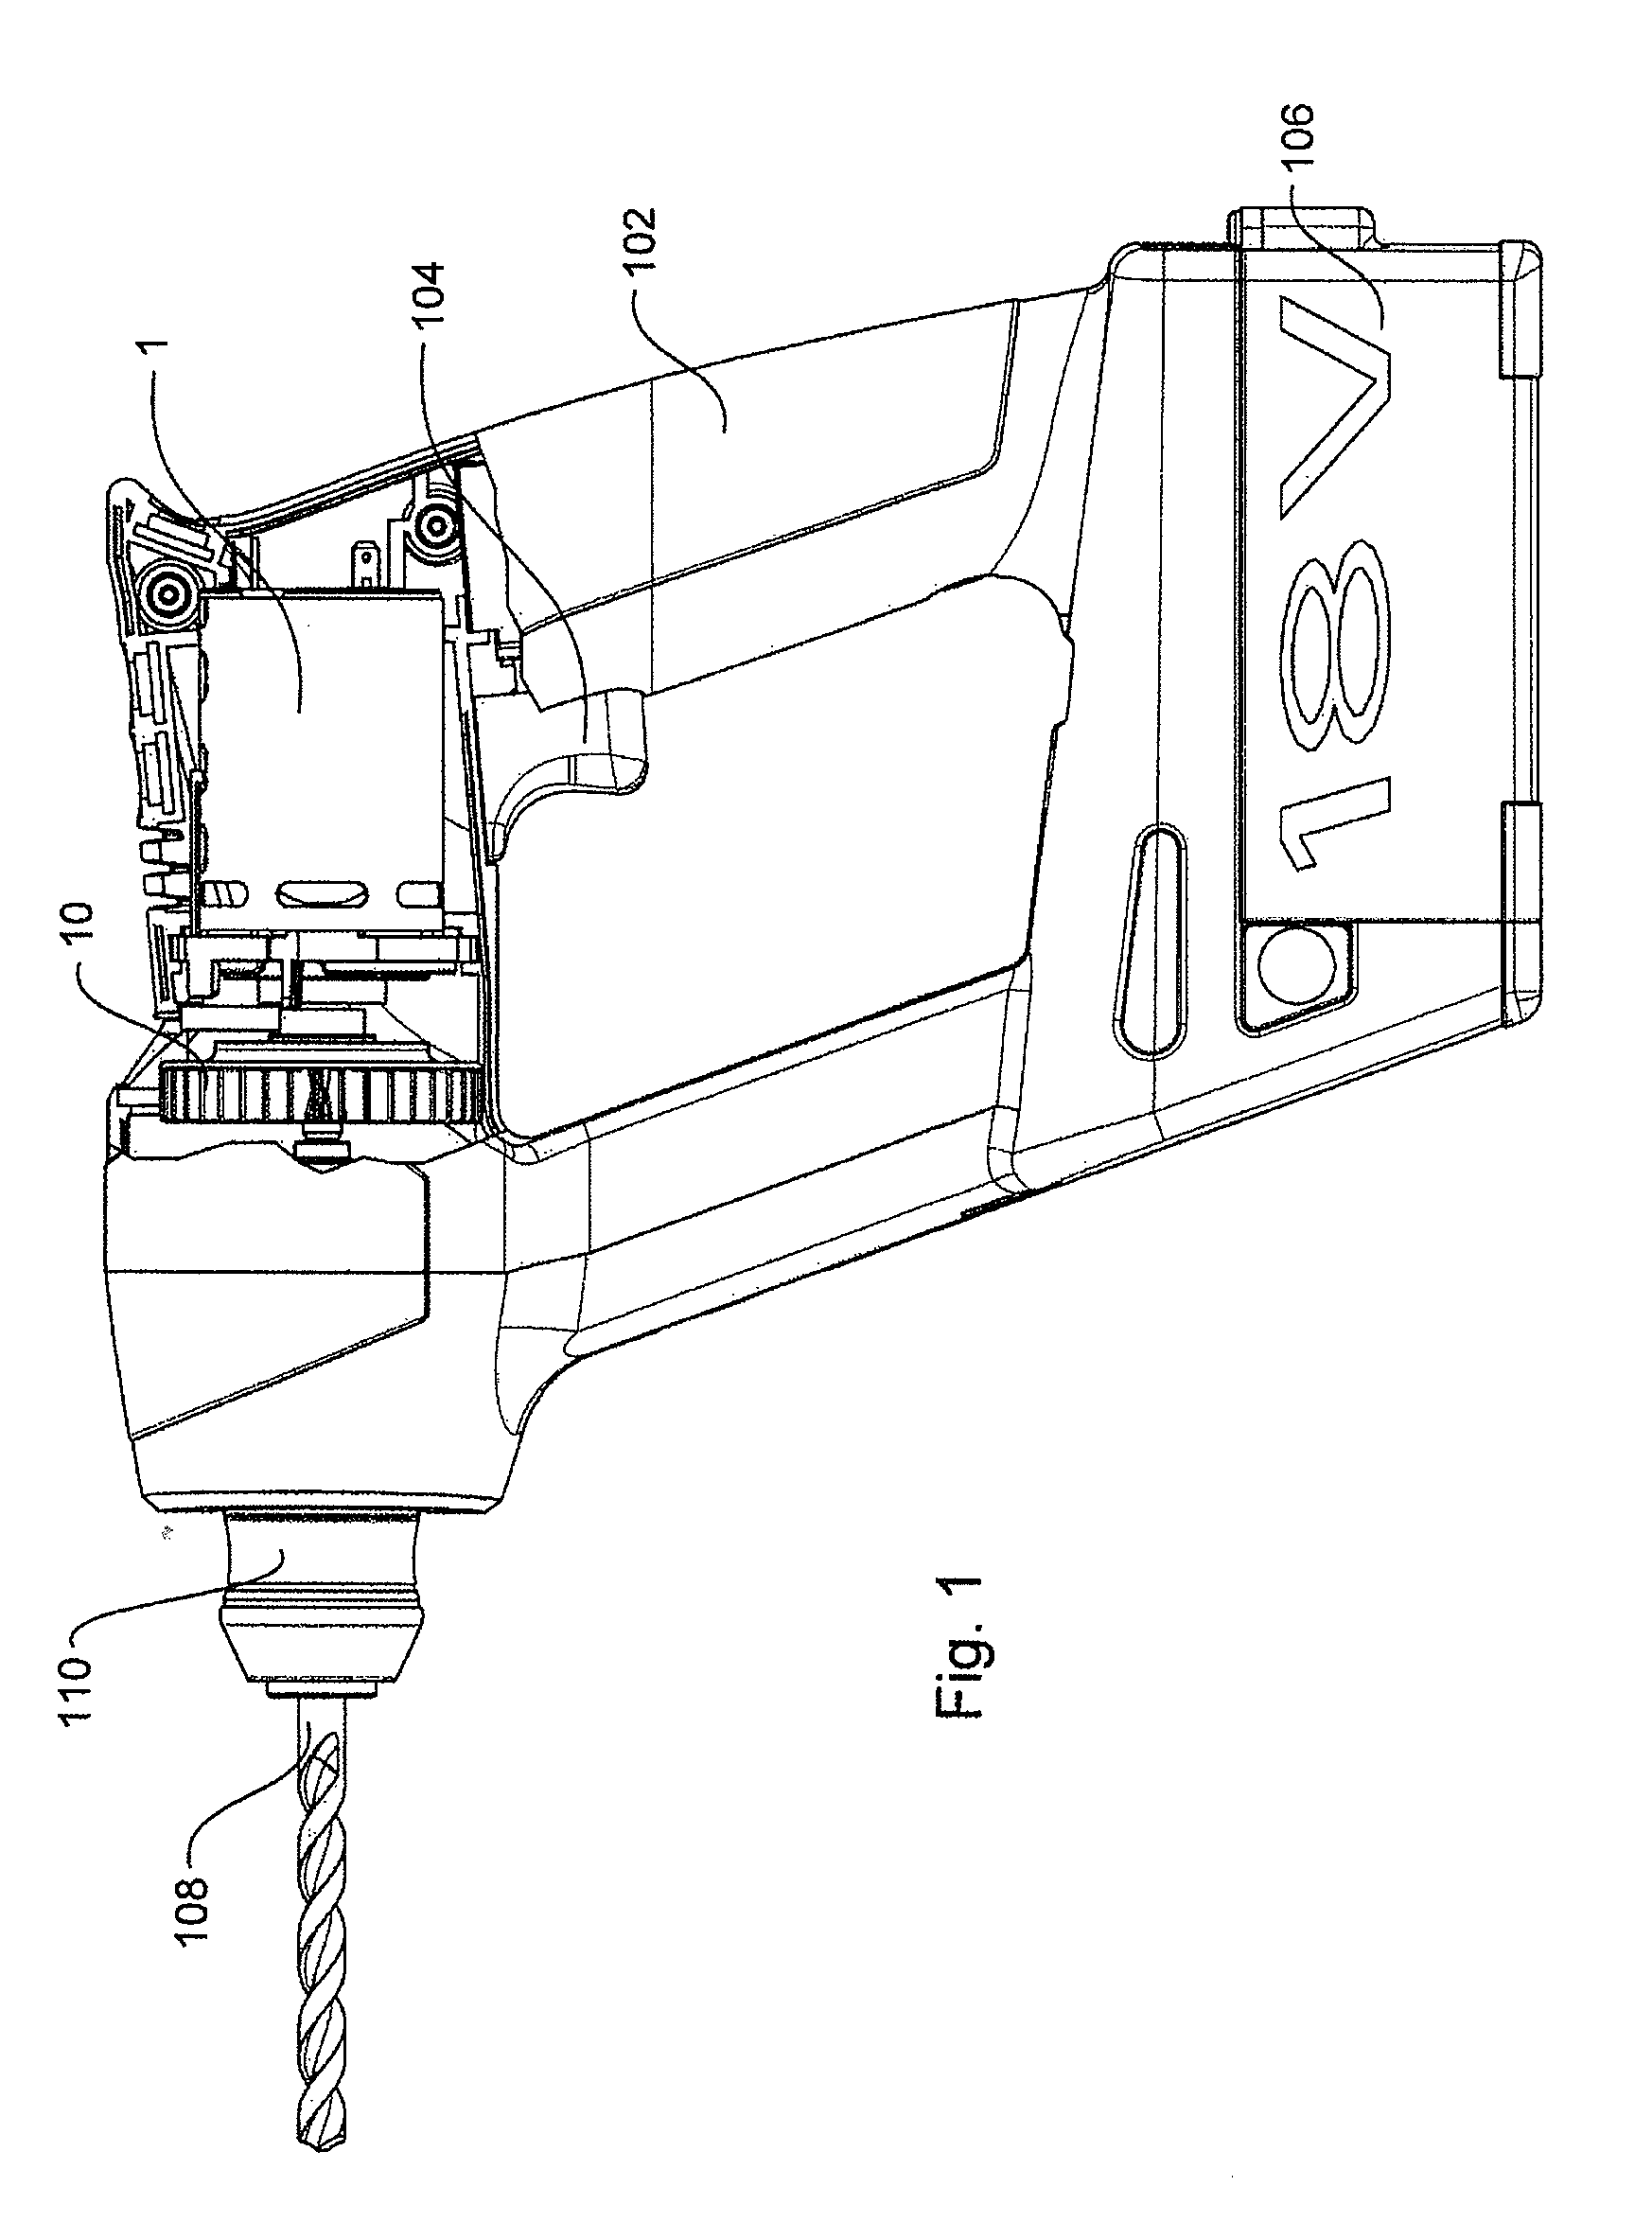 Adaptive cooling unit for a power tool